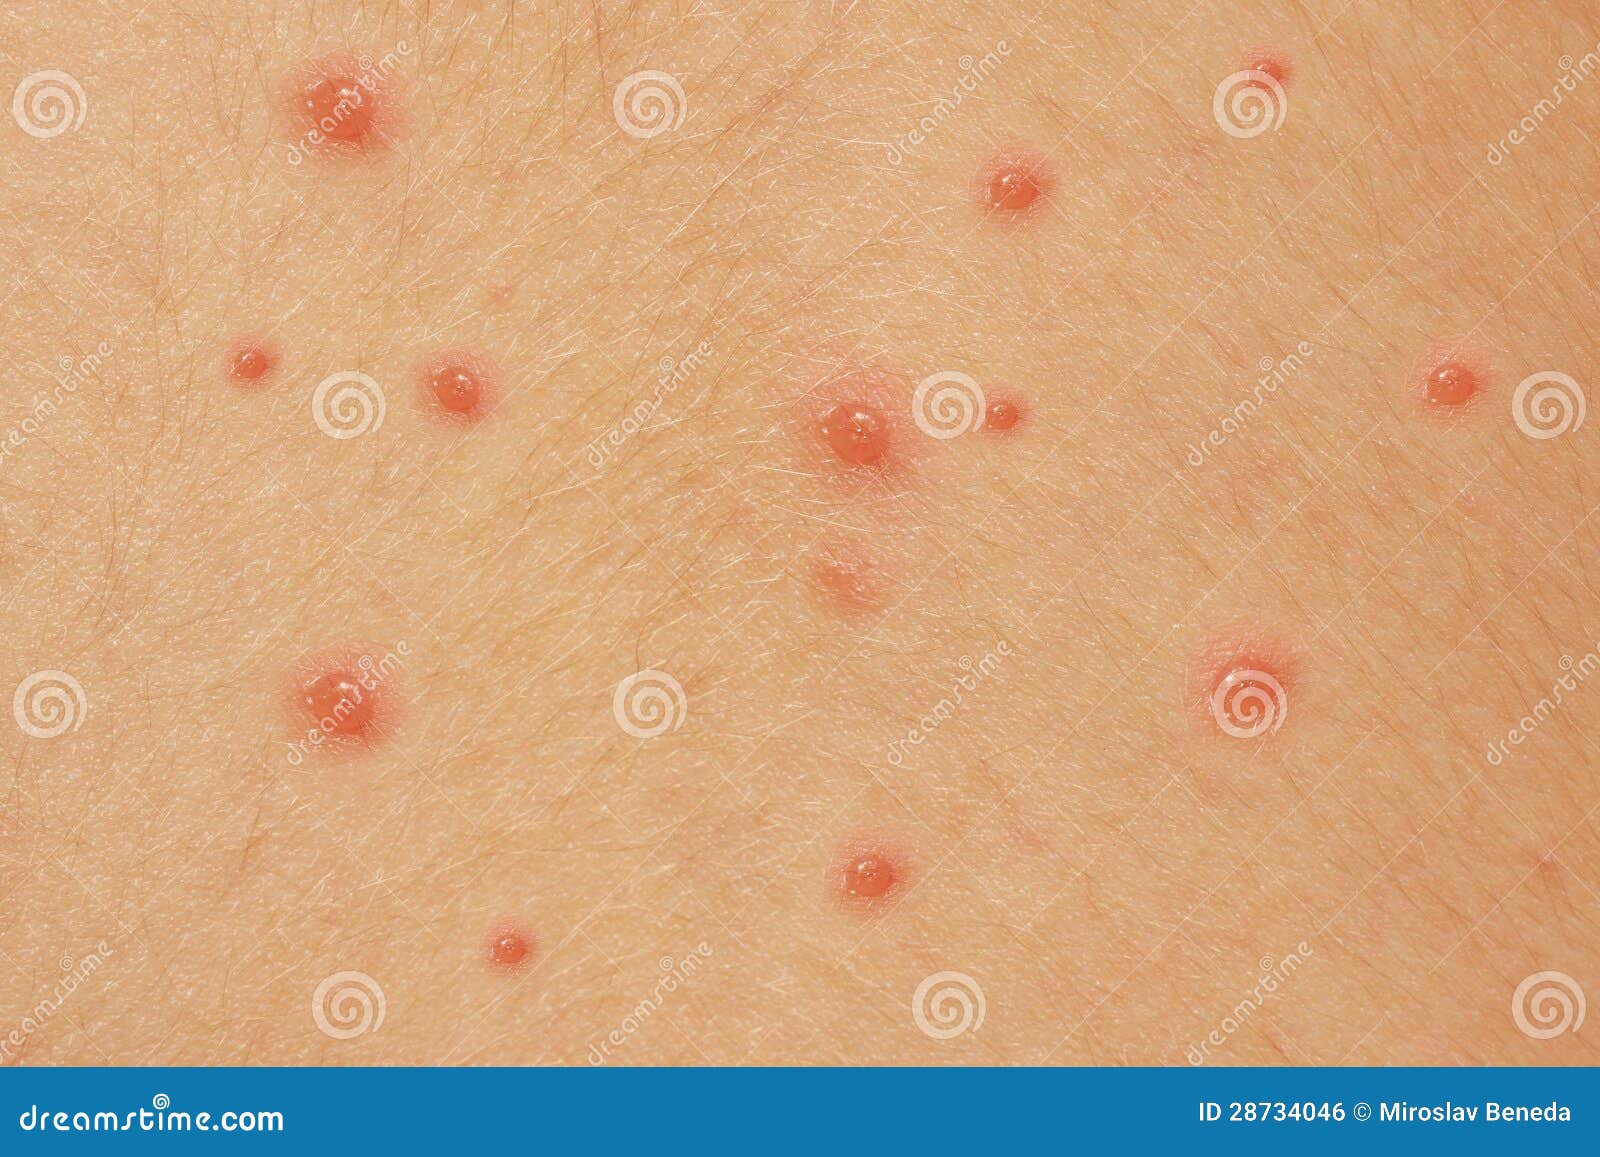 chicken pox baby pictures